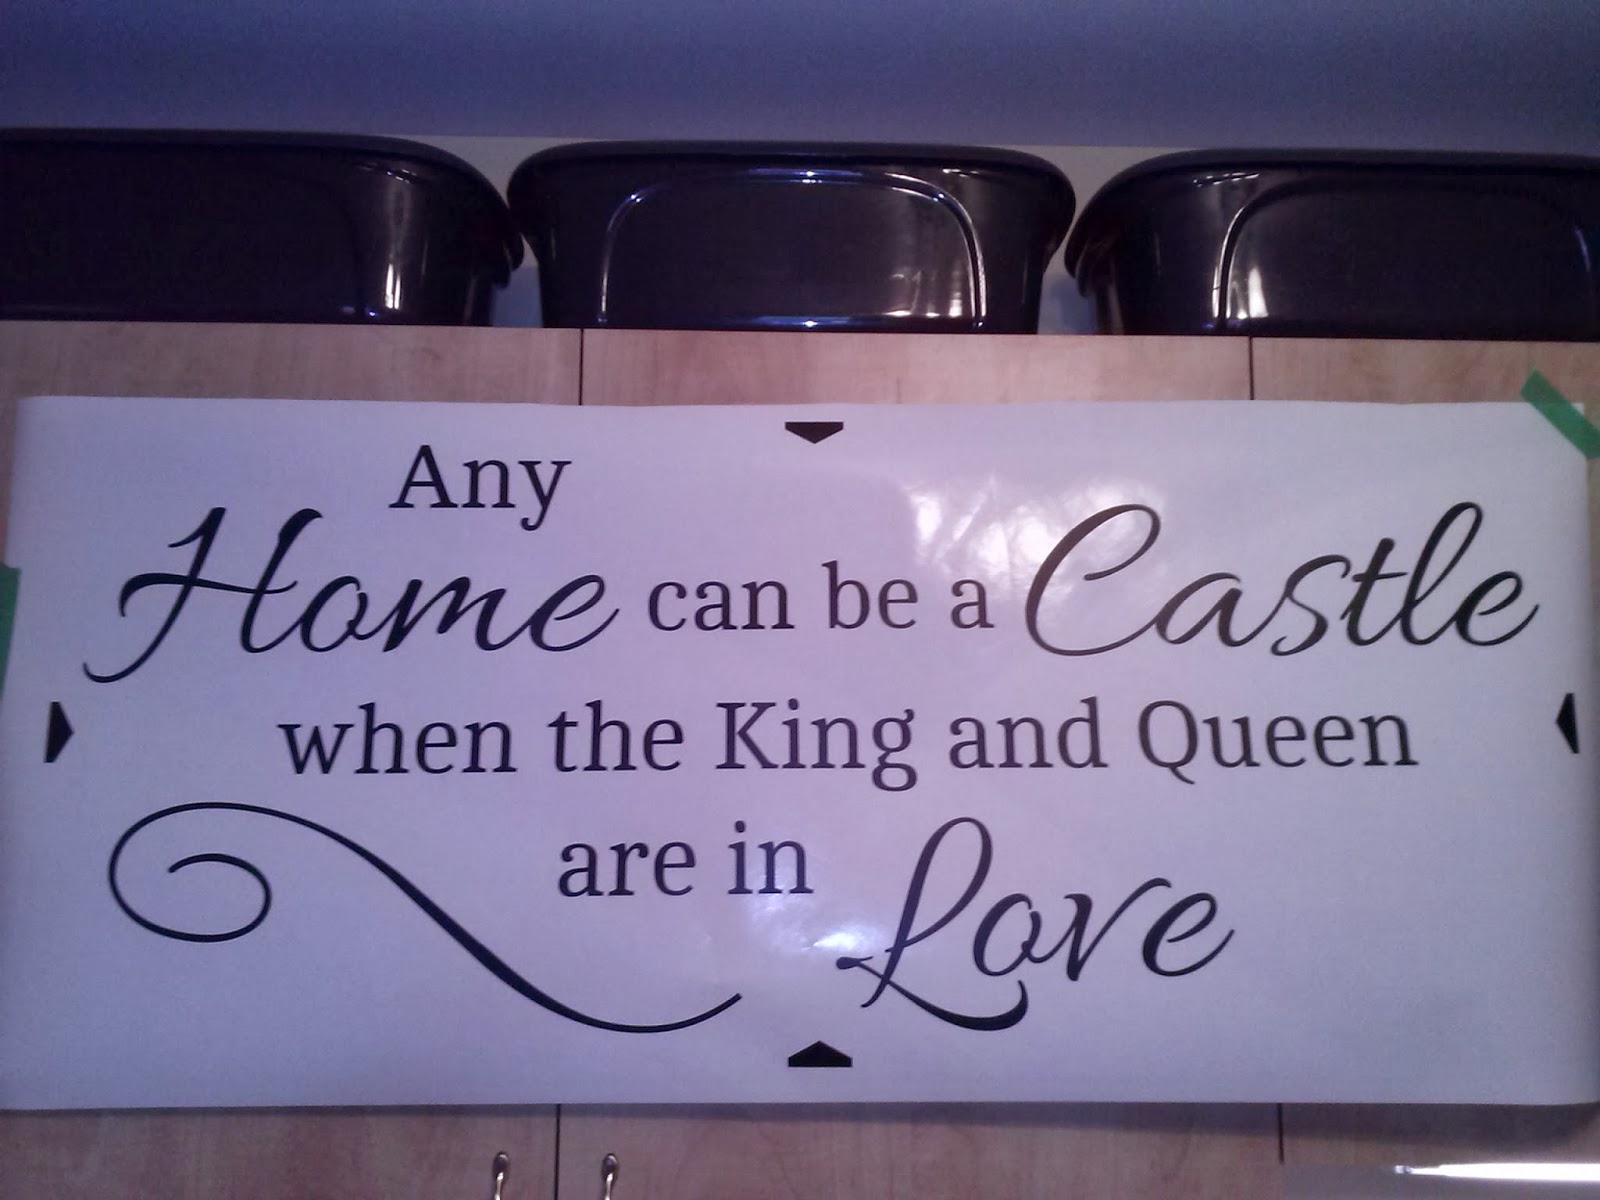 Any Home can be a castle when the king and queen are in love